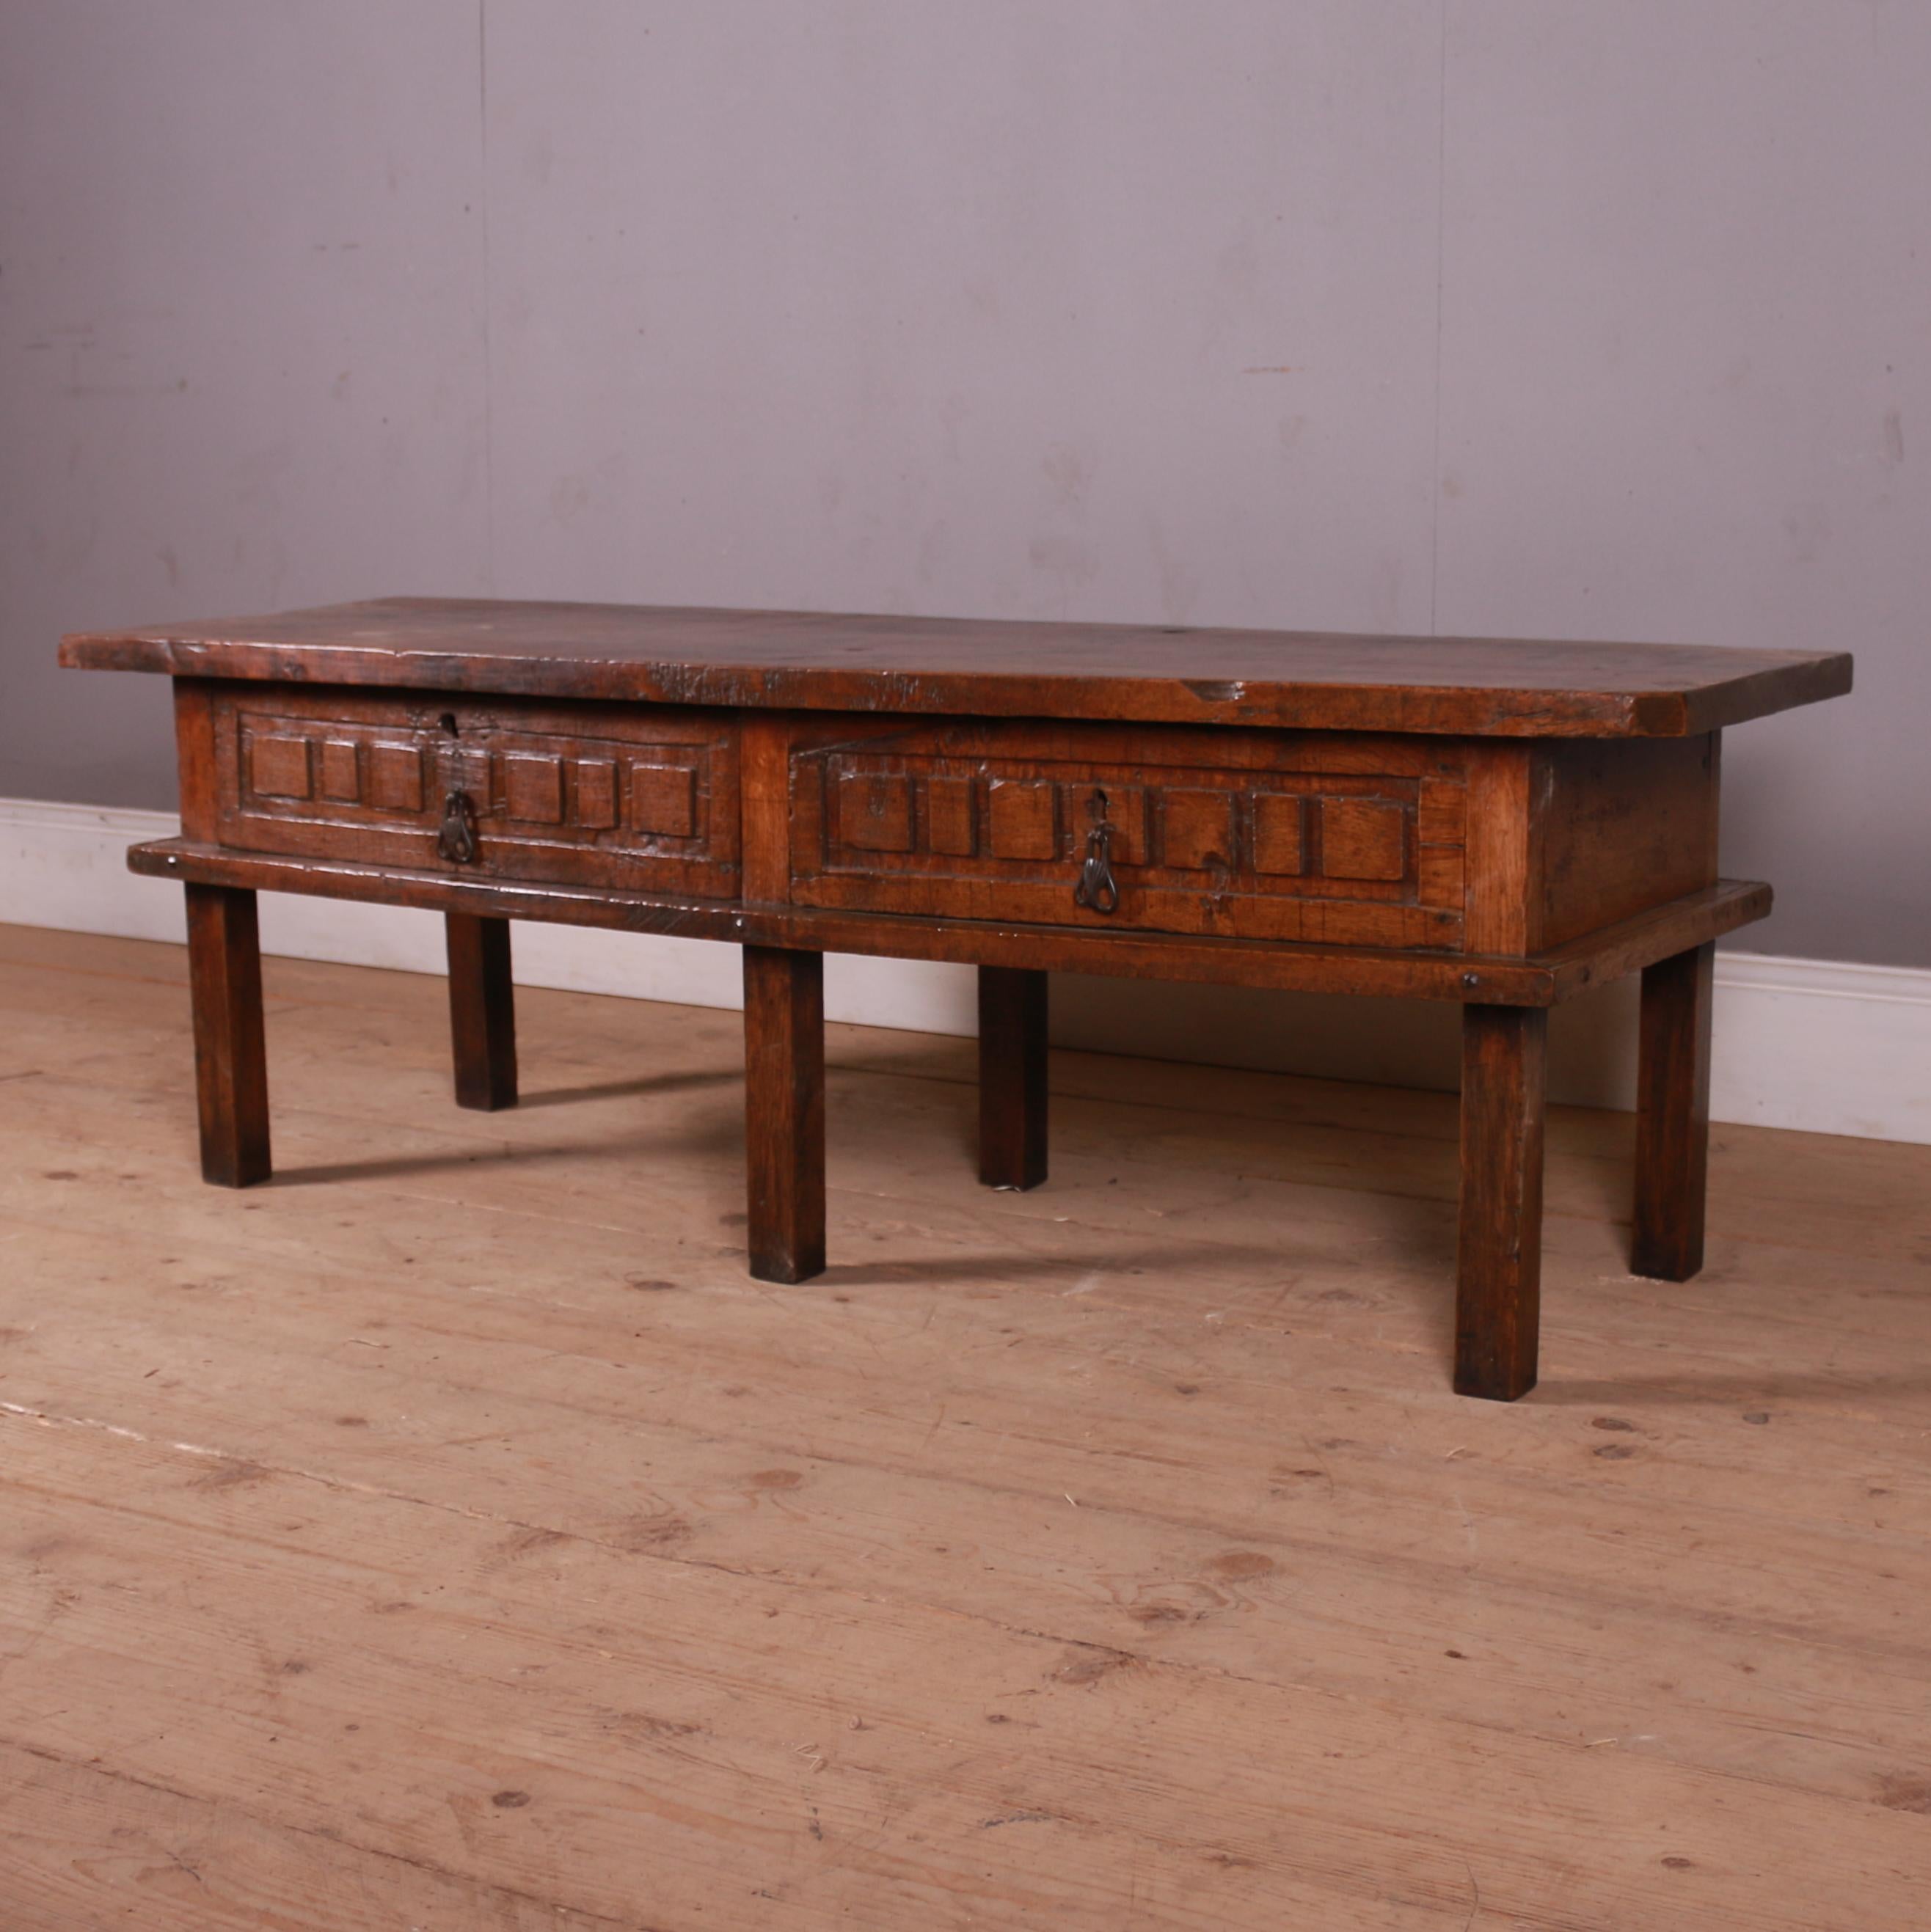 Good late 19th C French carve oak coffee table with two drawers. 1890

Reference: 7406

Dimensions
61 inches (155 cms) wide
20 inches (51 cms) deep
21 inches (53 cms) high.